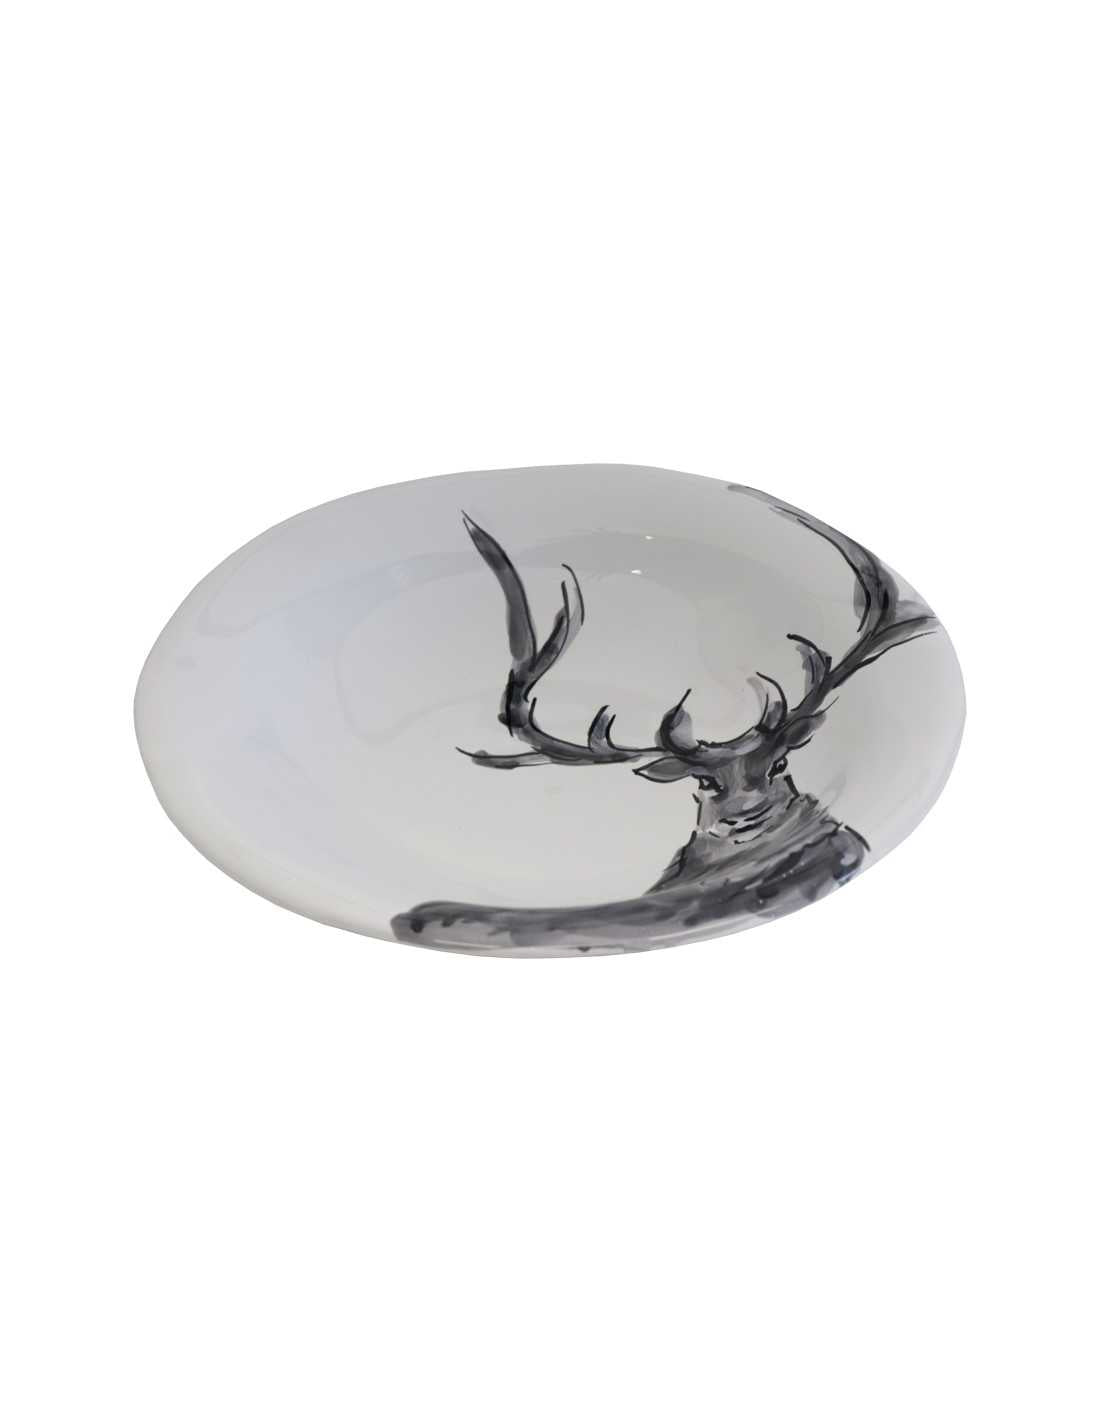 Hand-decorated ceramic soup plate, Deer 22 cm